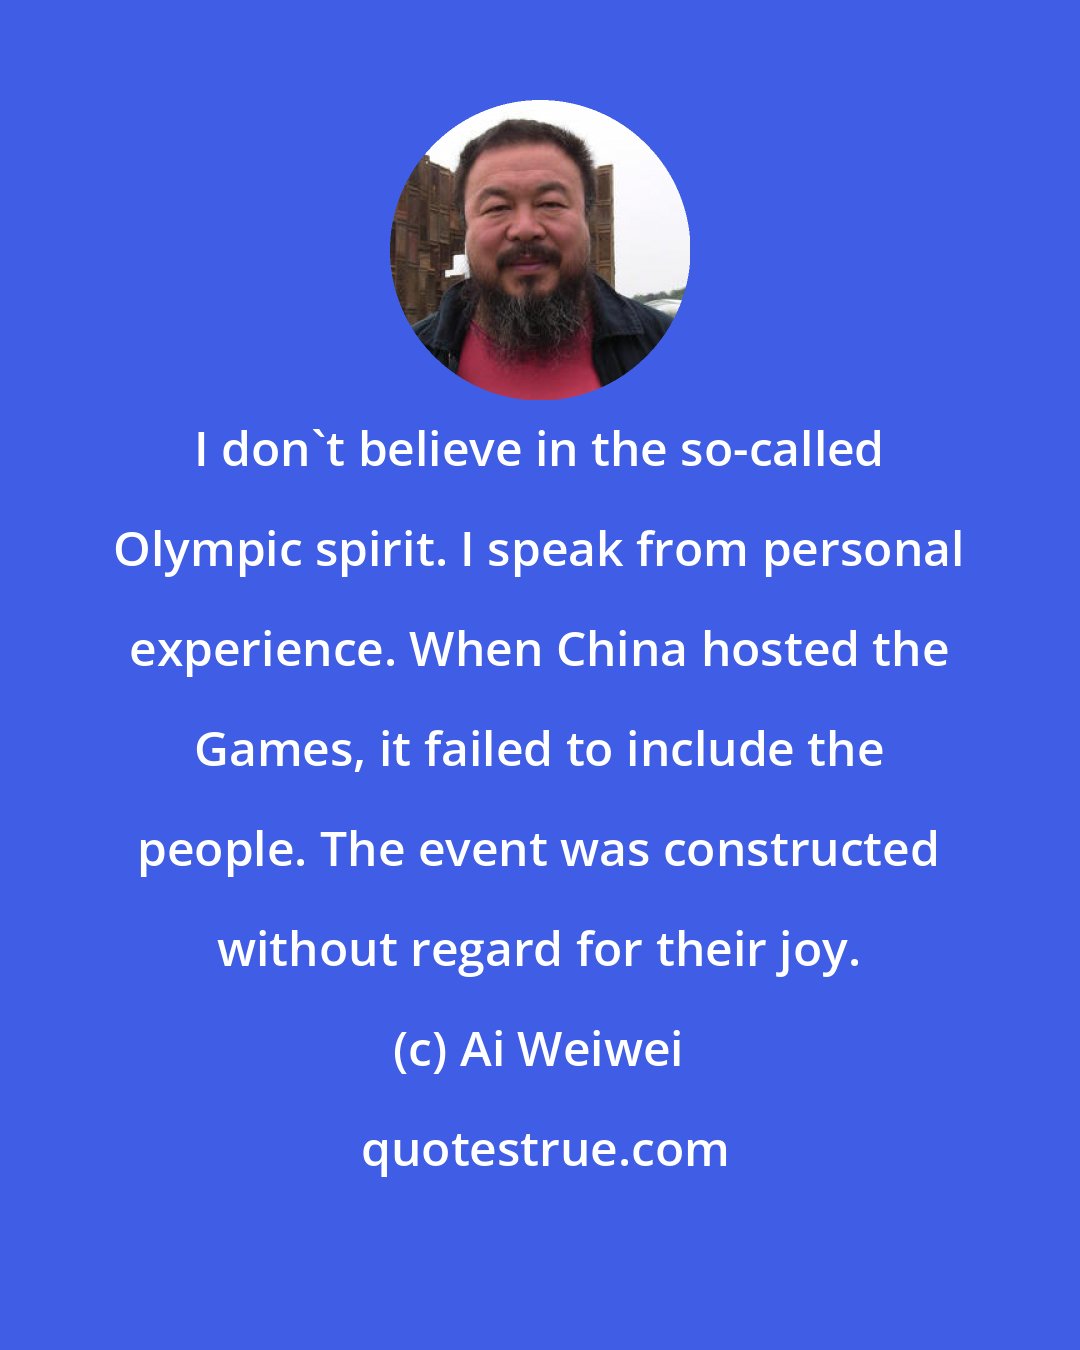 Ai Weiwei: I don't believe in the so-called Olympic spirit. I speak from personal experience. When China hosted the Games, it failed to include the people. The event was constructed without regard for their joy.